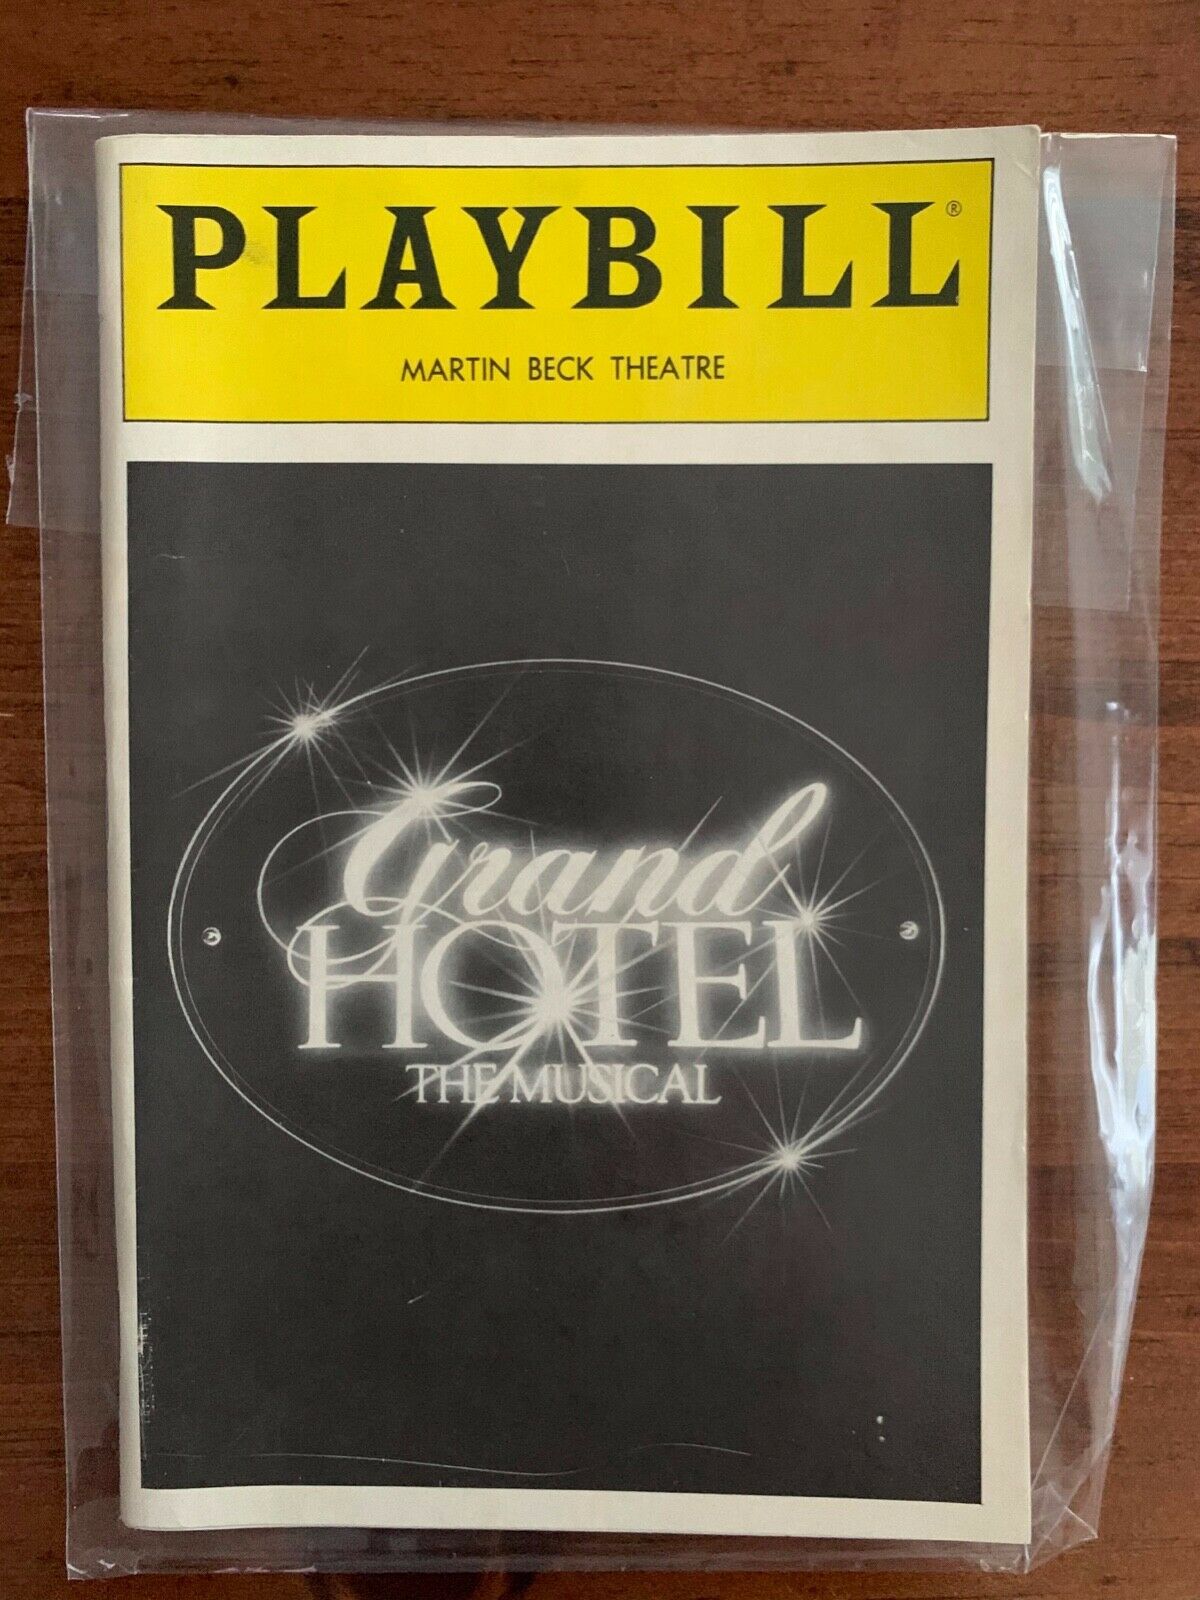 Grand Hotel The Musical 1990 Playbill